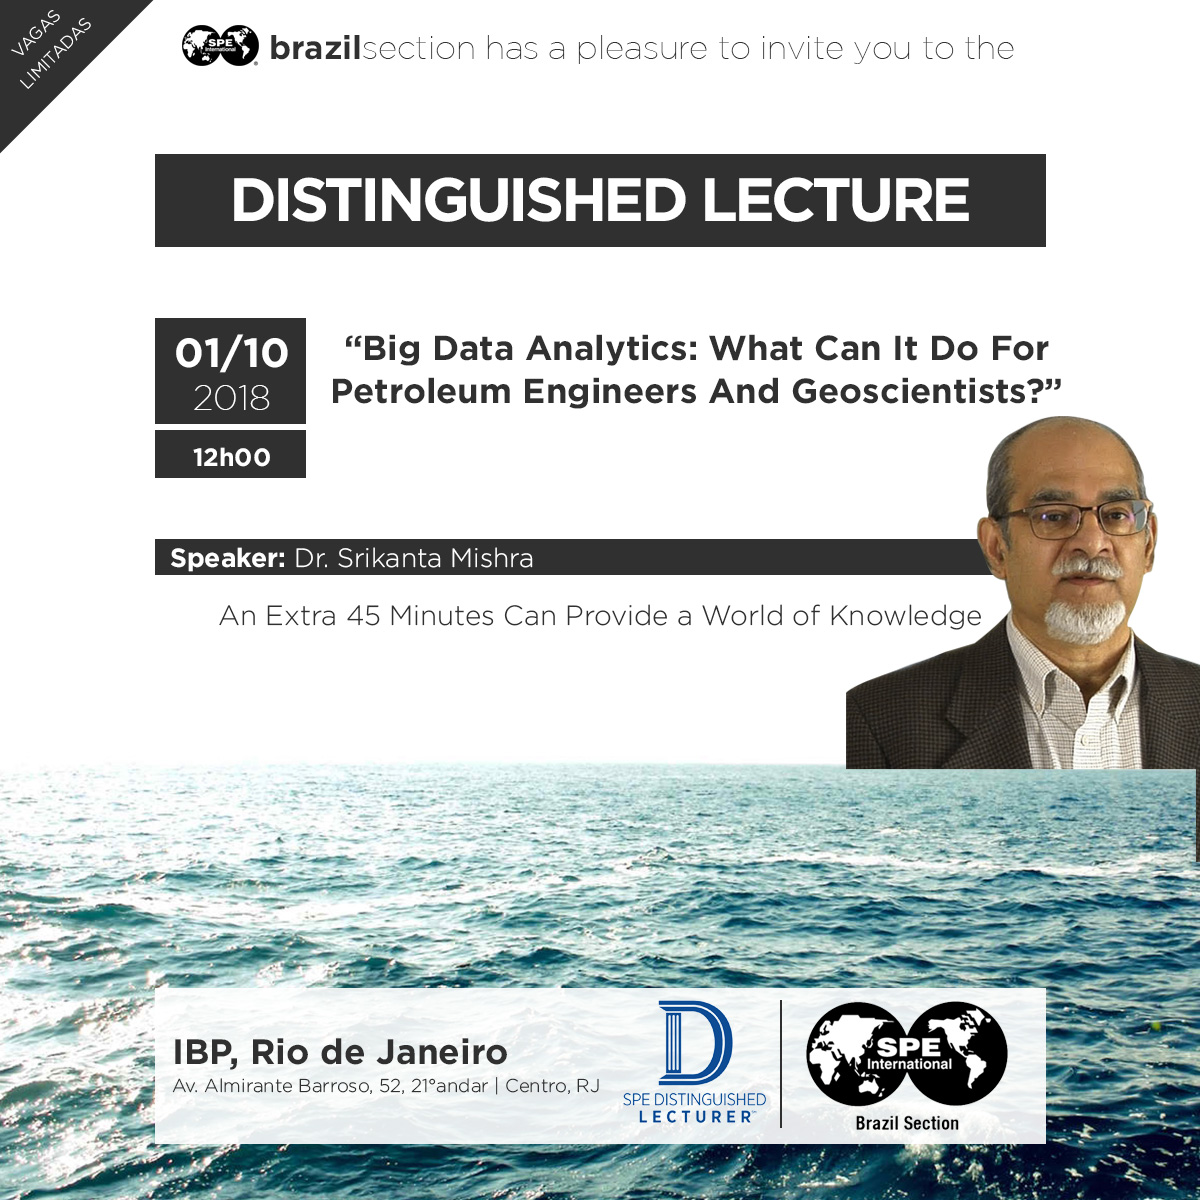 DISTINGUISHED LECTURER: “Big Data Analytics: What Can It Do For Petroleum Engineers And Geoscientists?”